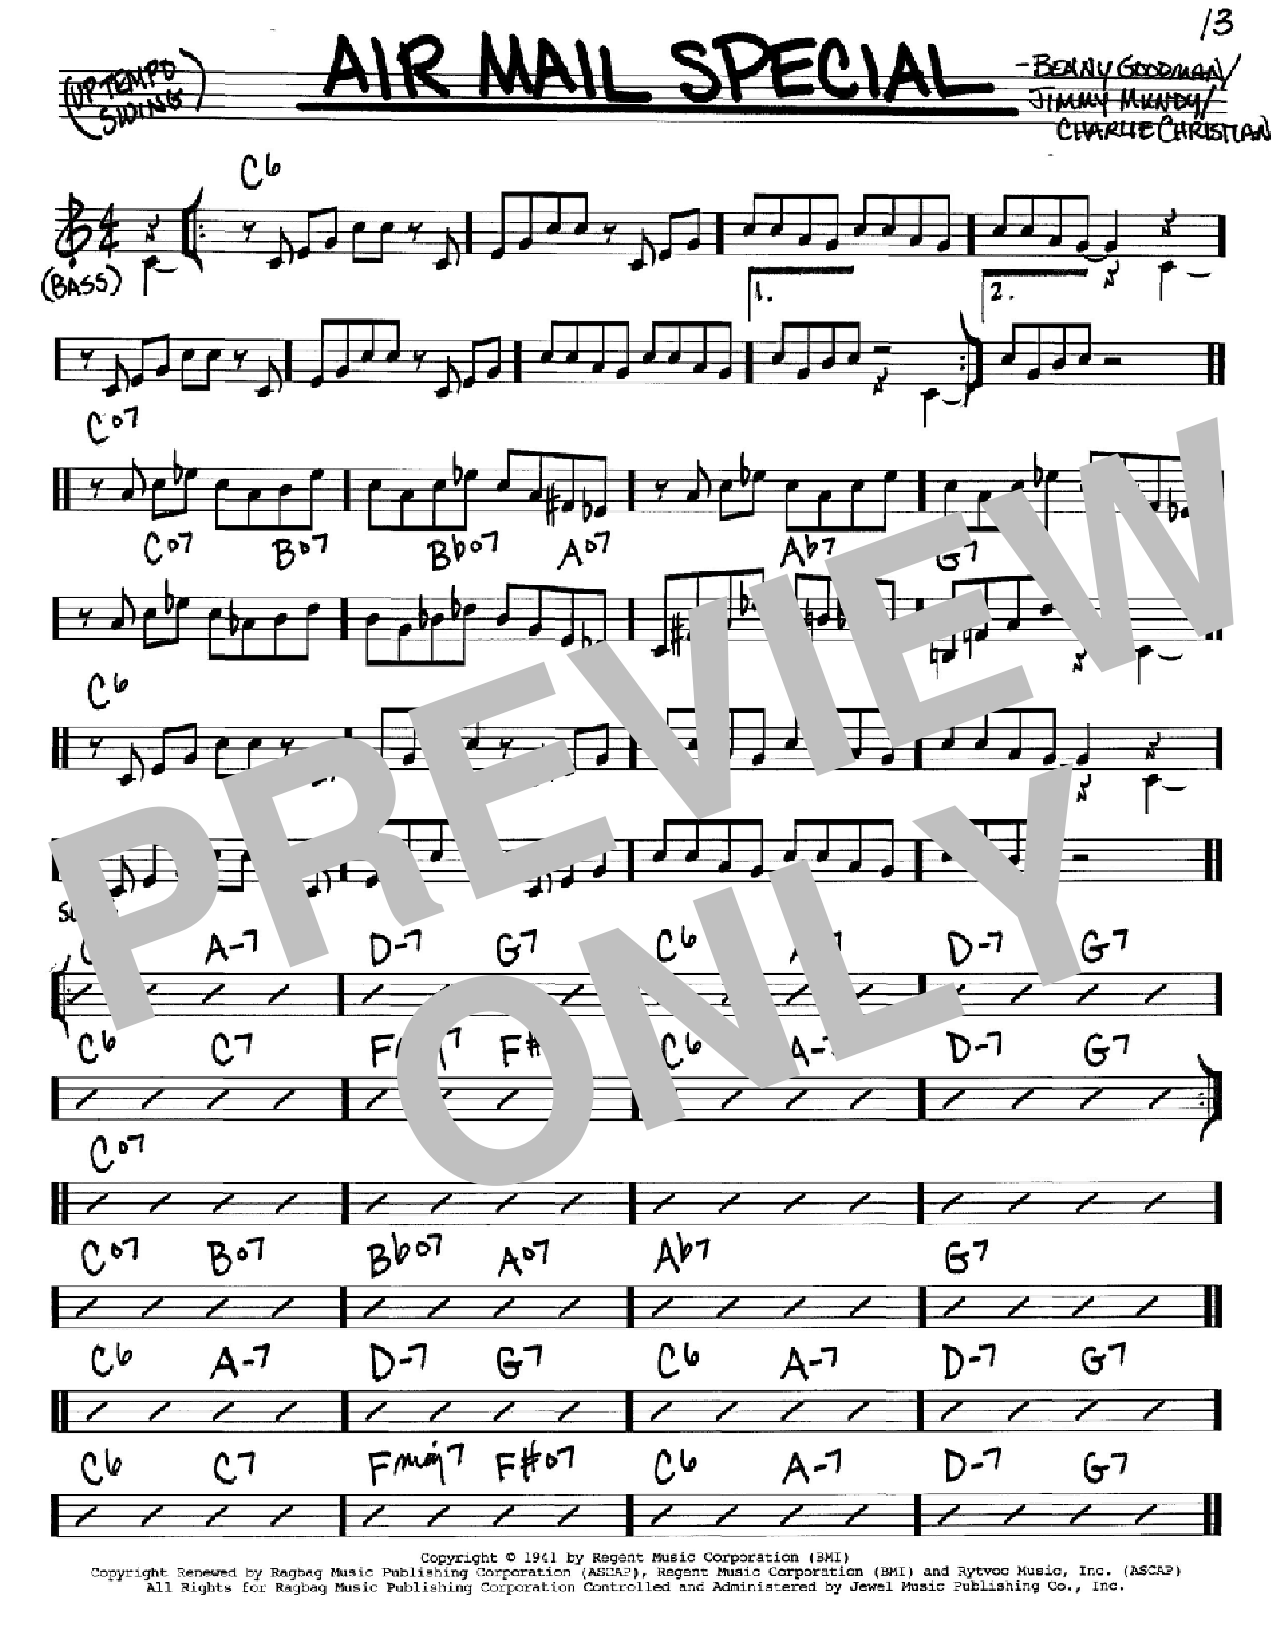 Download Benny Goodman Air Mail Special Sheet Music